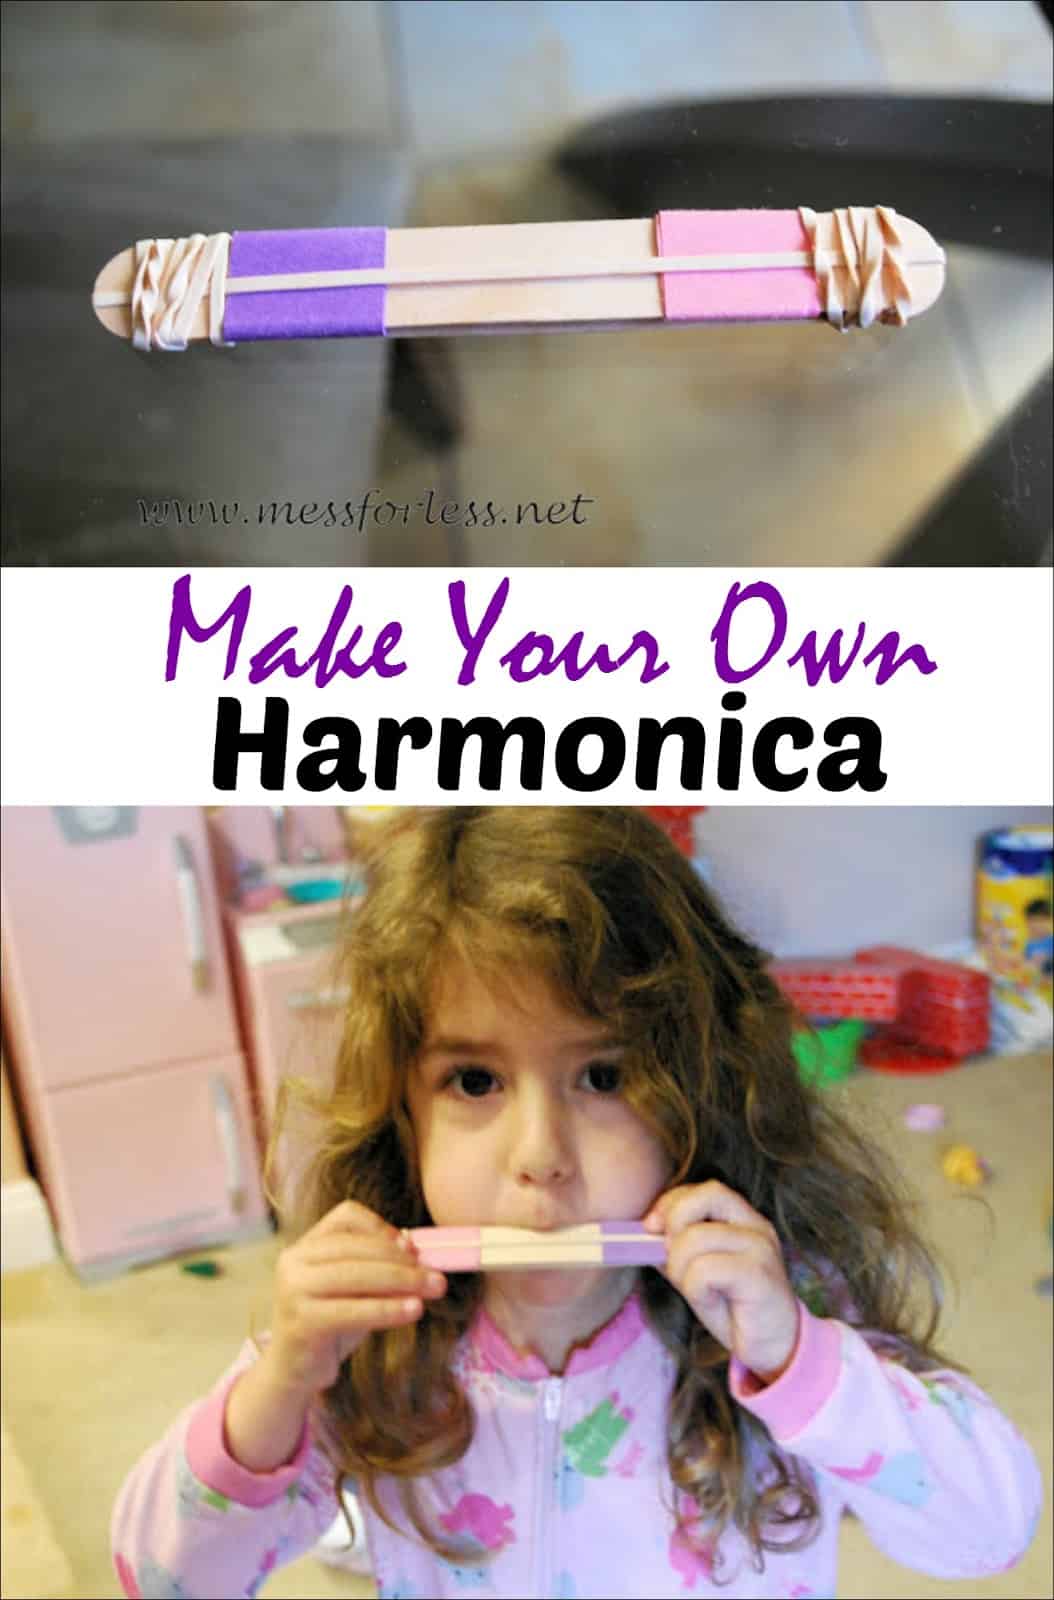 Homemade harmonica - simple craft that will delight your kids!